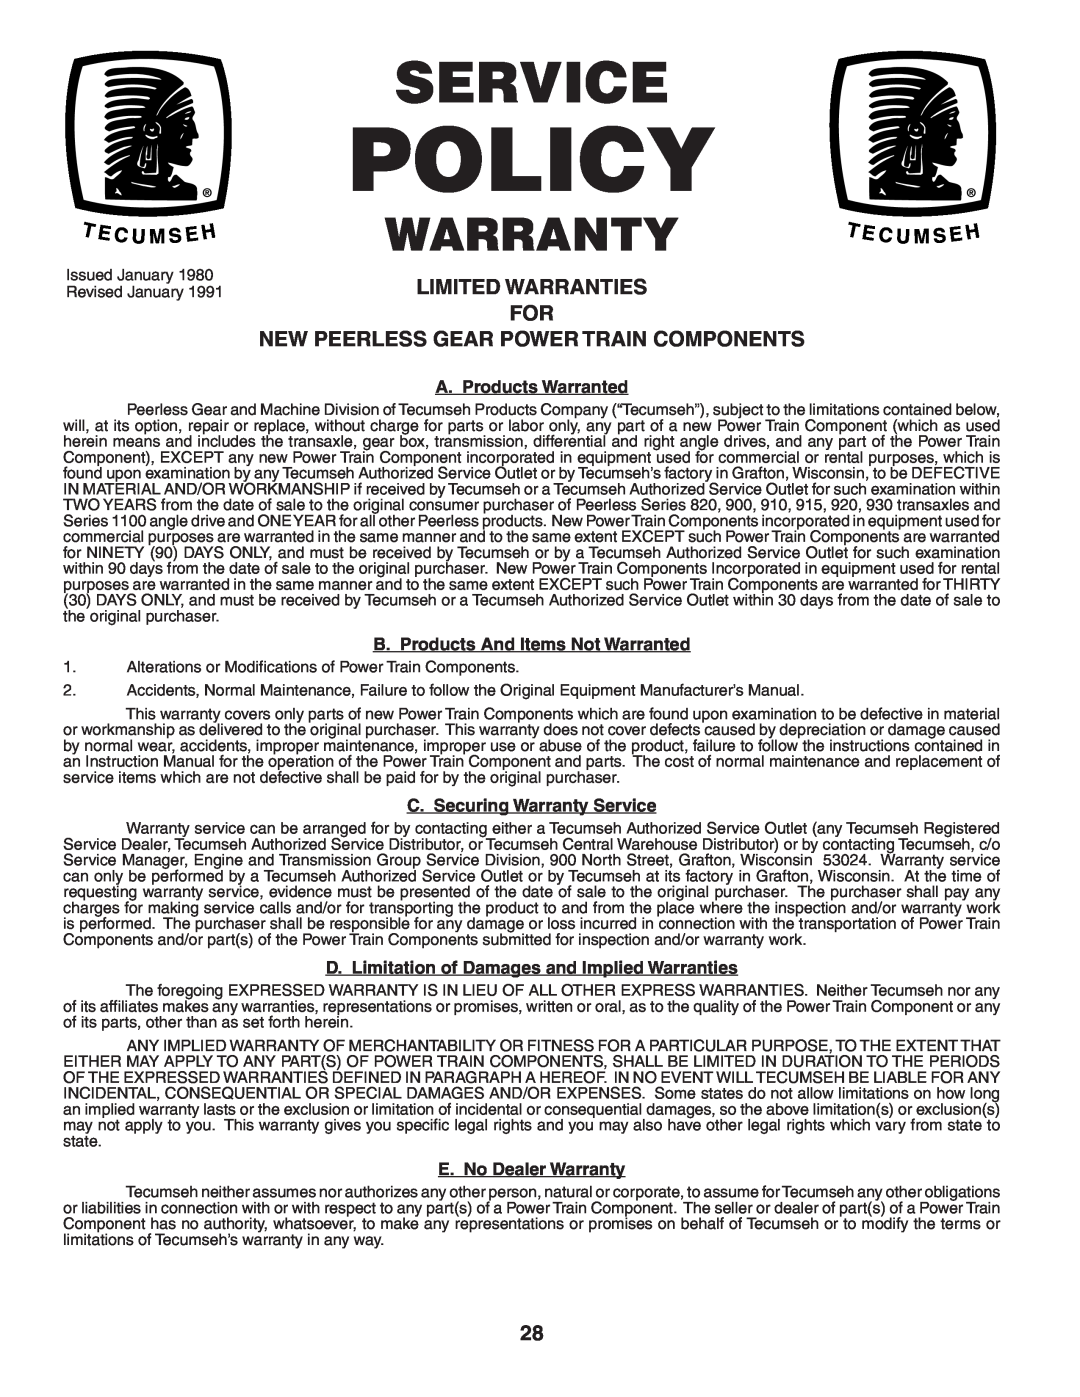 Poulan 96012004701, 402559 manual Limited Warranties For New Peerless Gear Power Train Components, Policy, Service, Warranty 